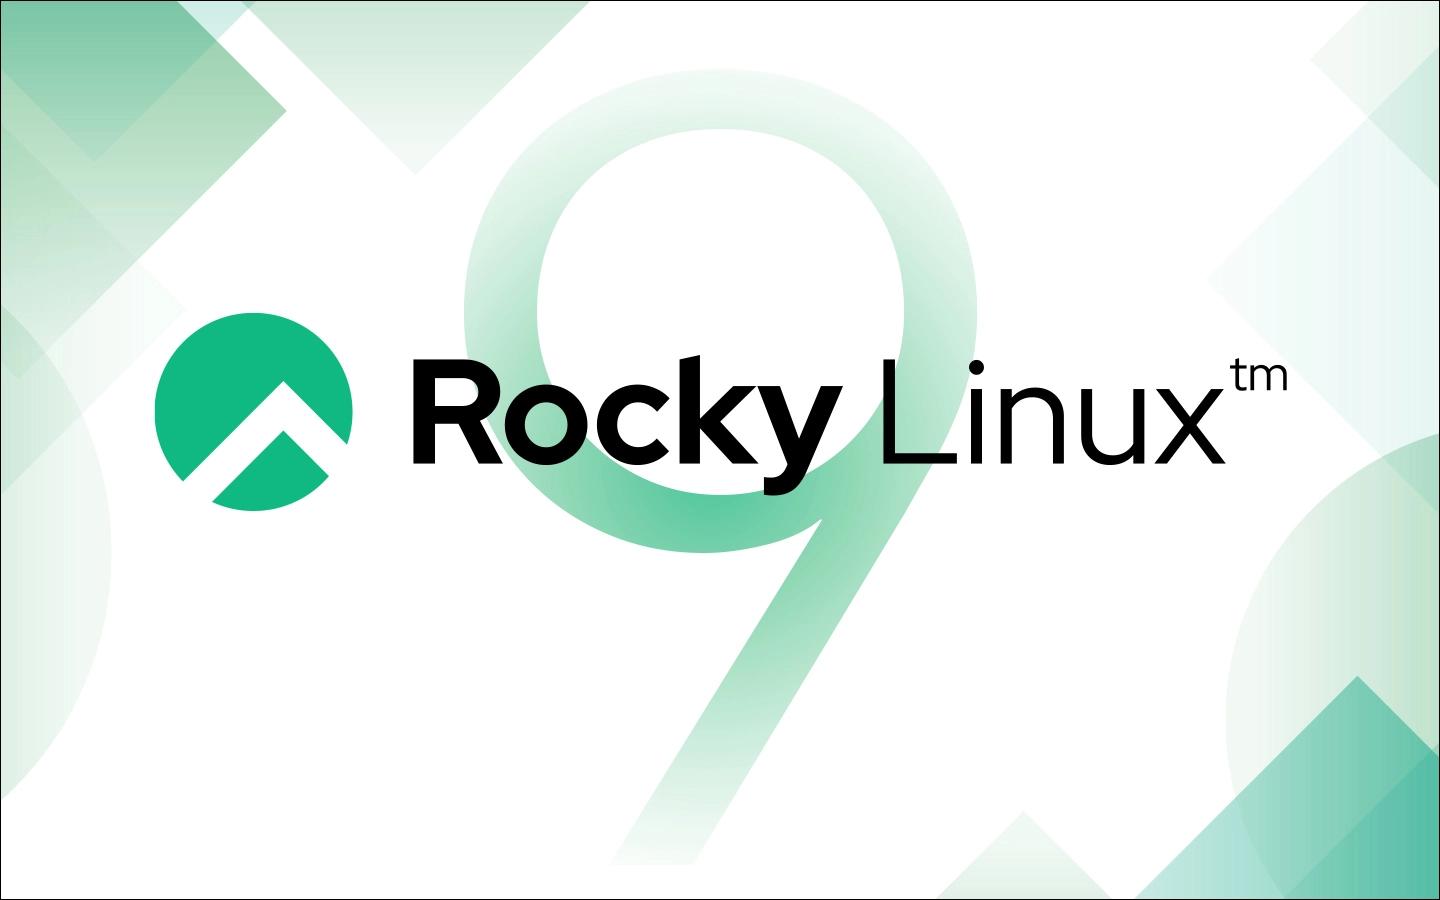 RockyLinux 9.1 is available